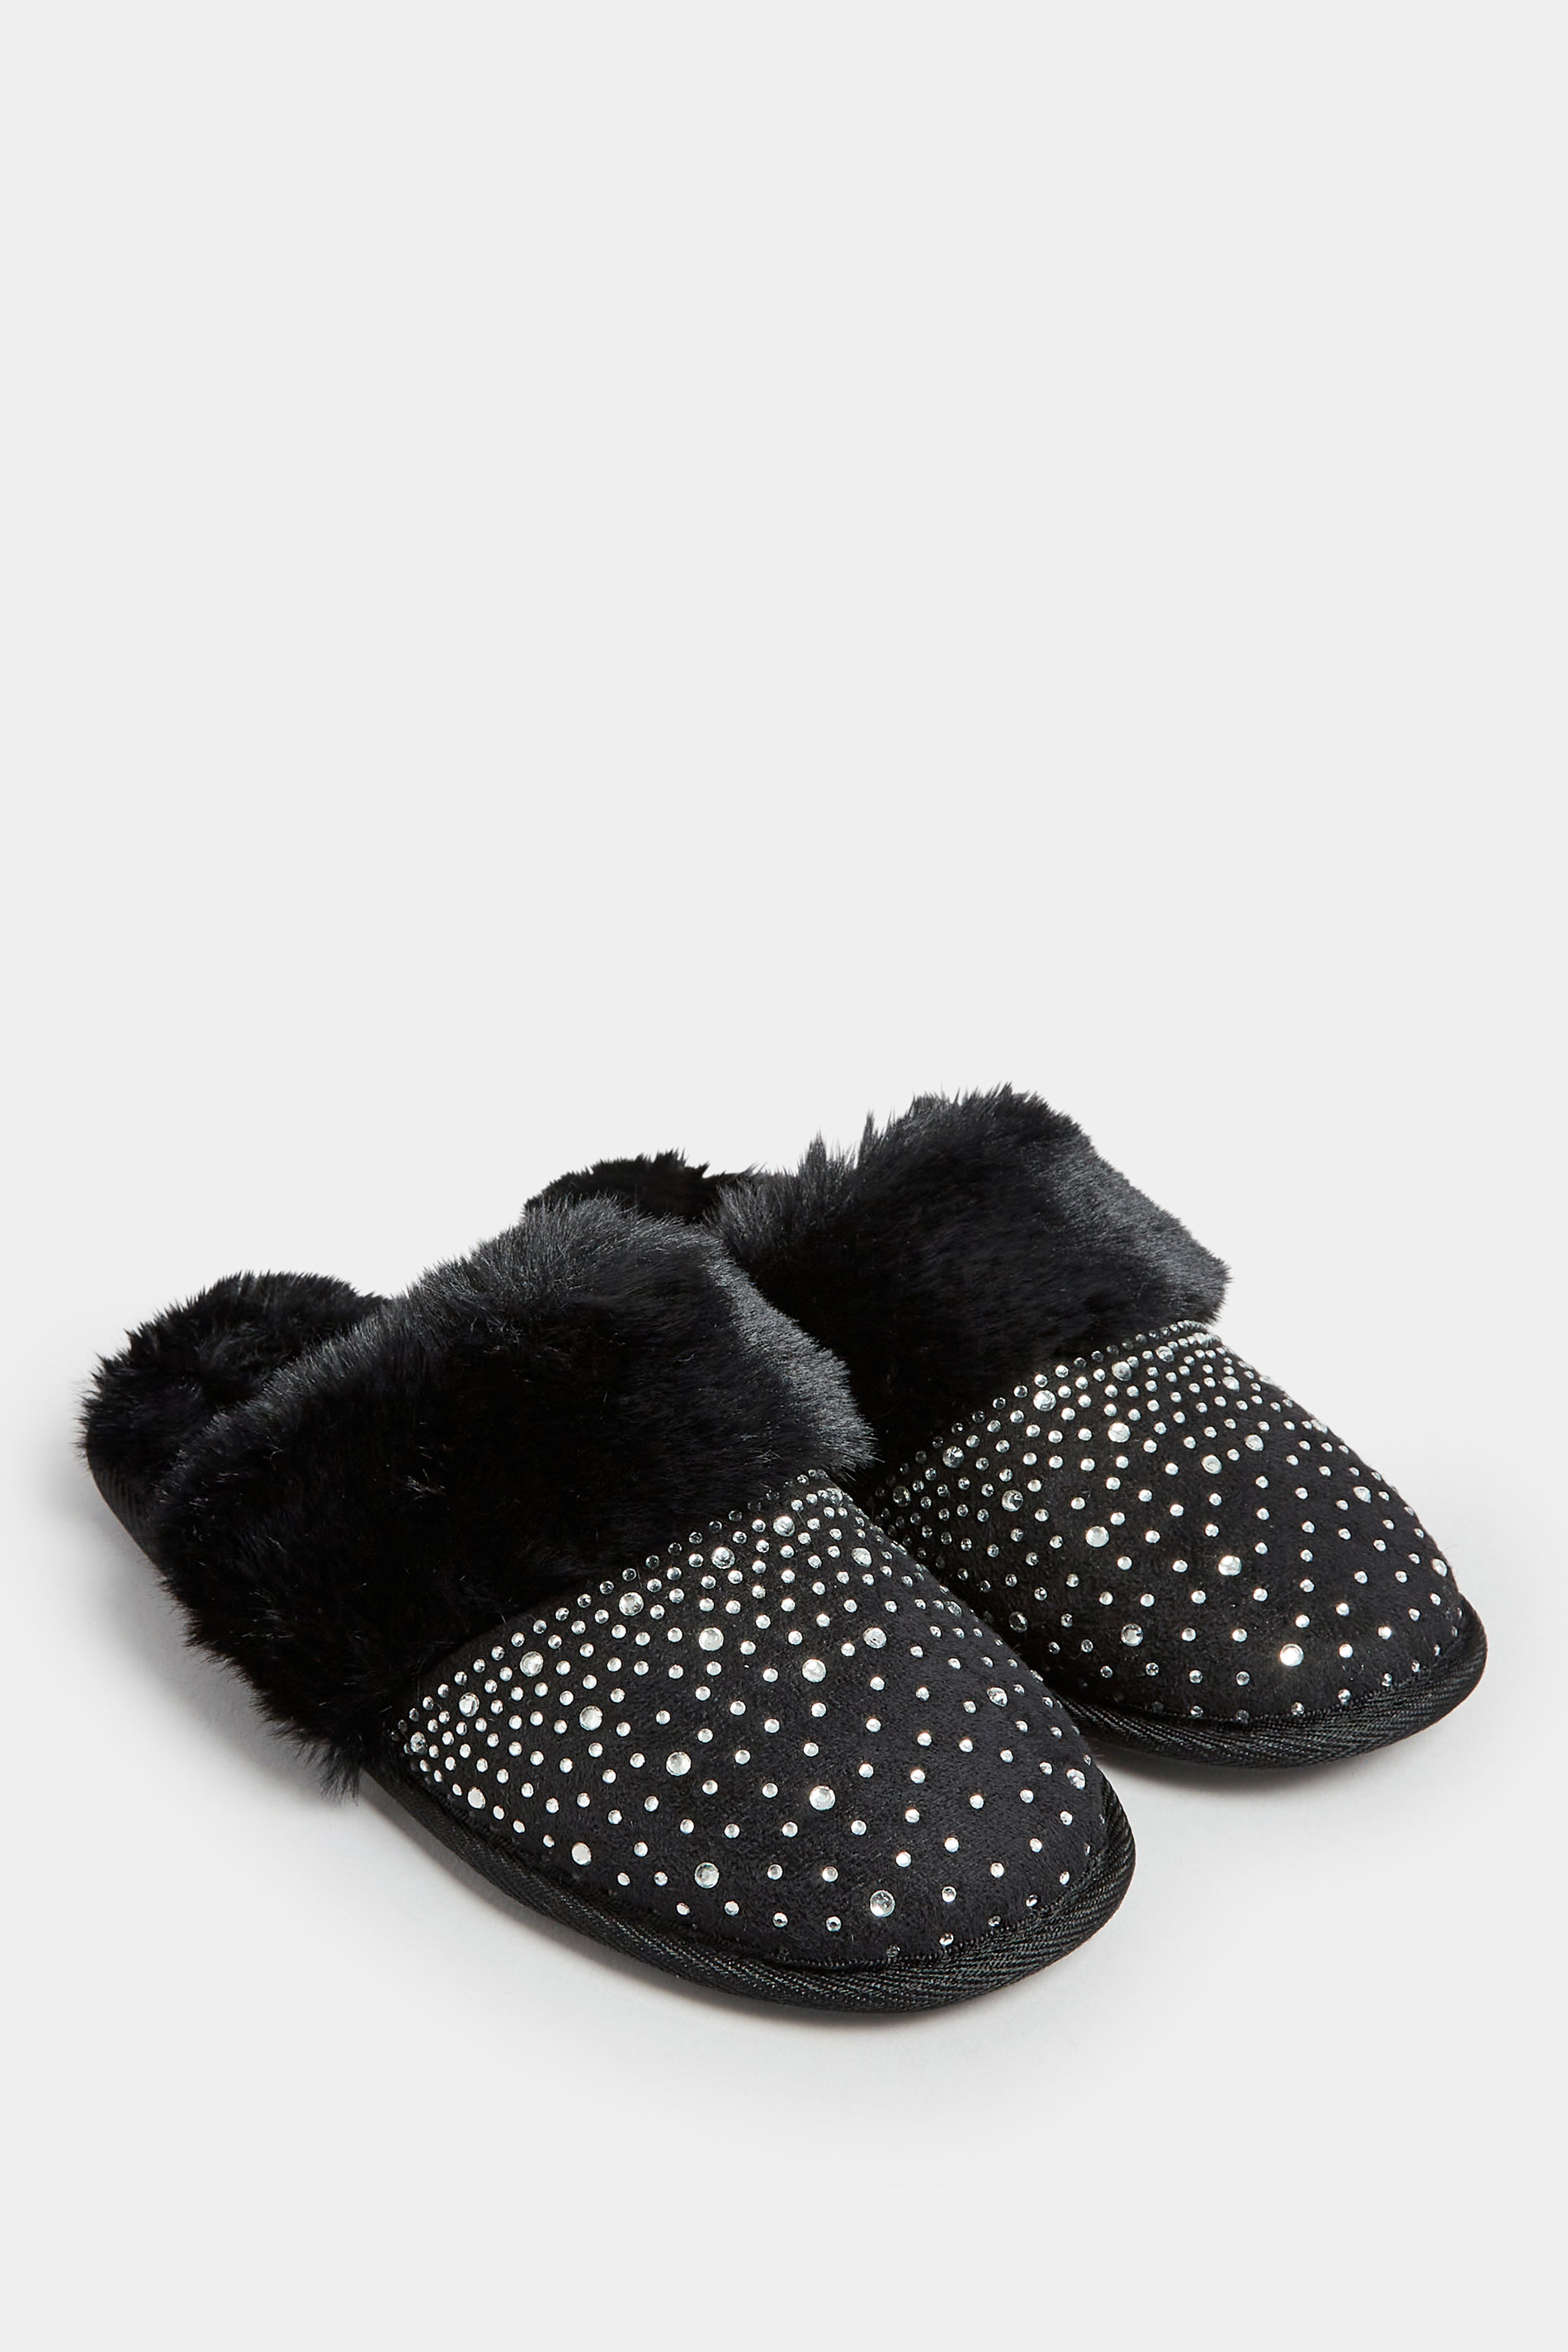 Black Diamante Faux Fur Slippers In Wide E Fit | Yours Clothing 2